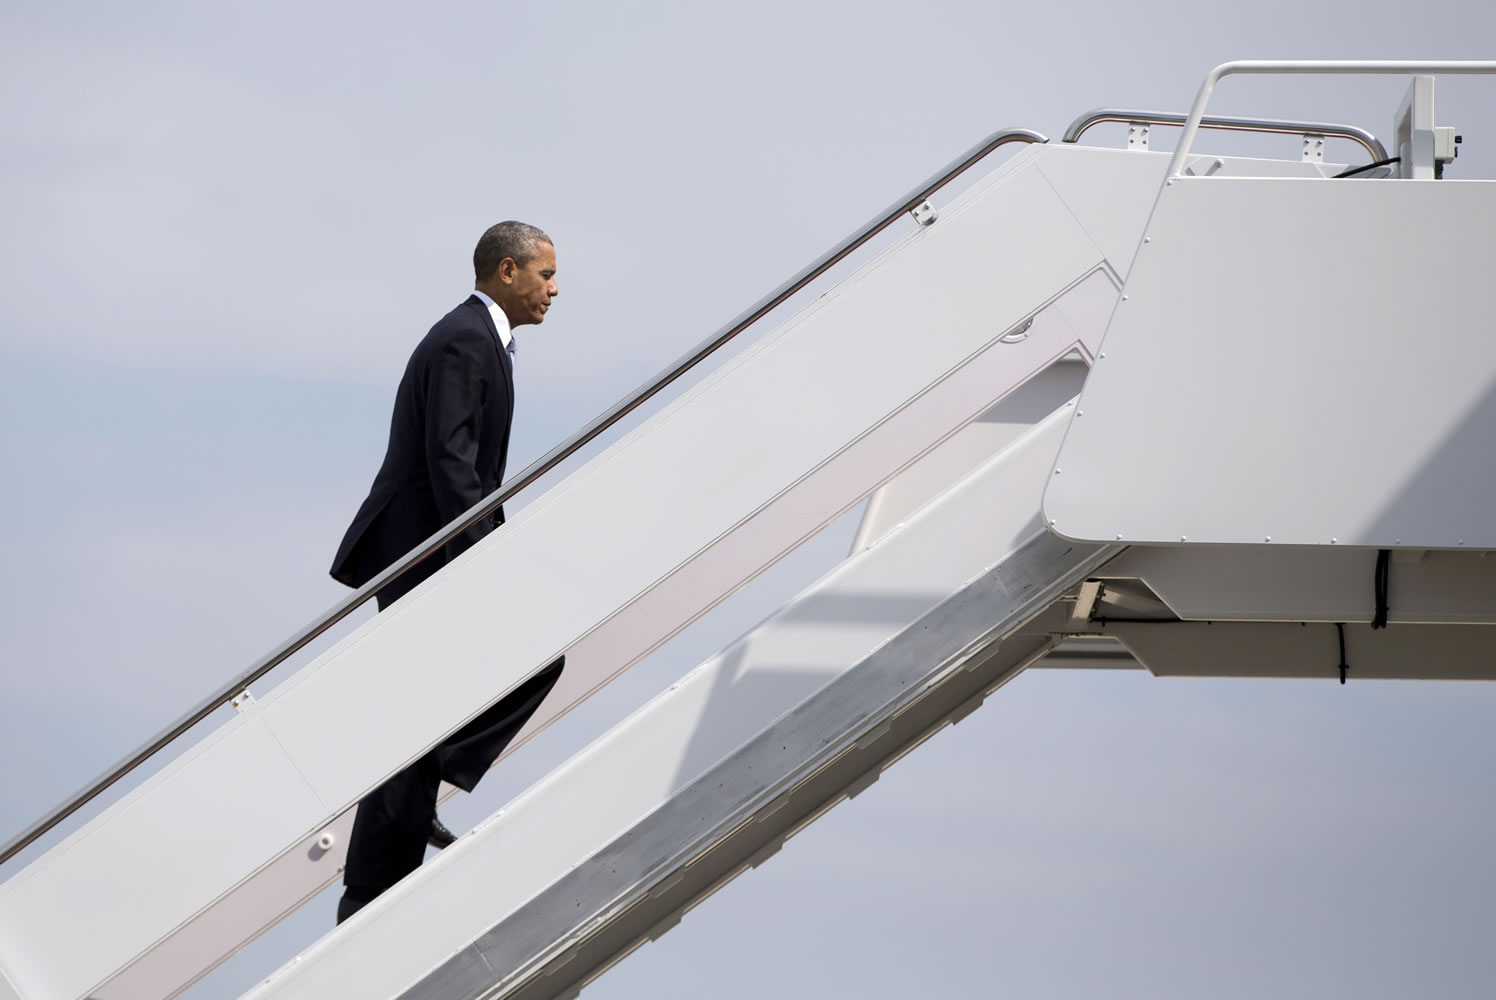 President Barack Obama boards Air Force One on Tuesday at Andrews Air Force Base, Md., en route to Oso, the site of the deadly mudslide that struck the community.